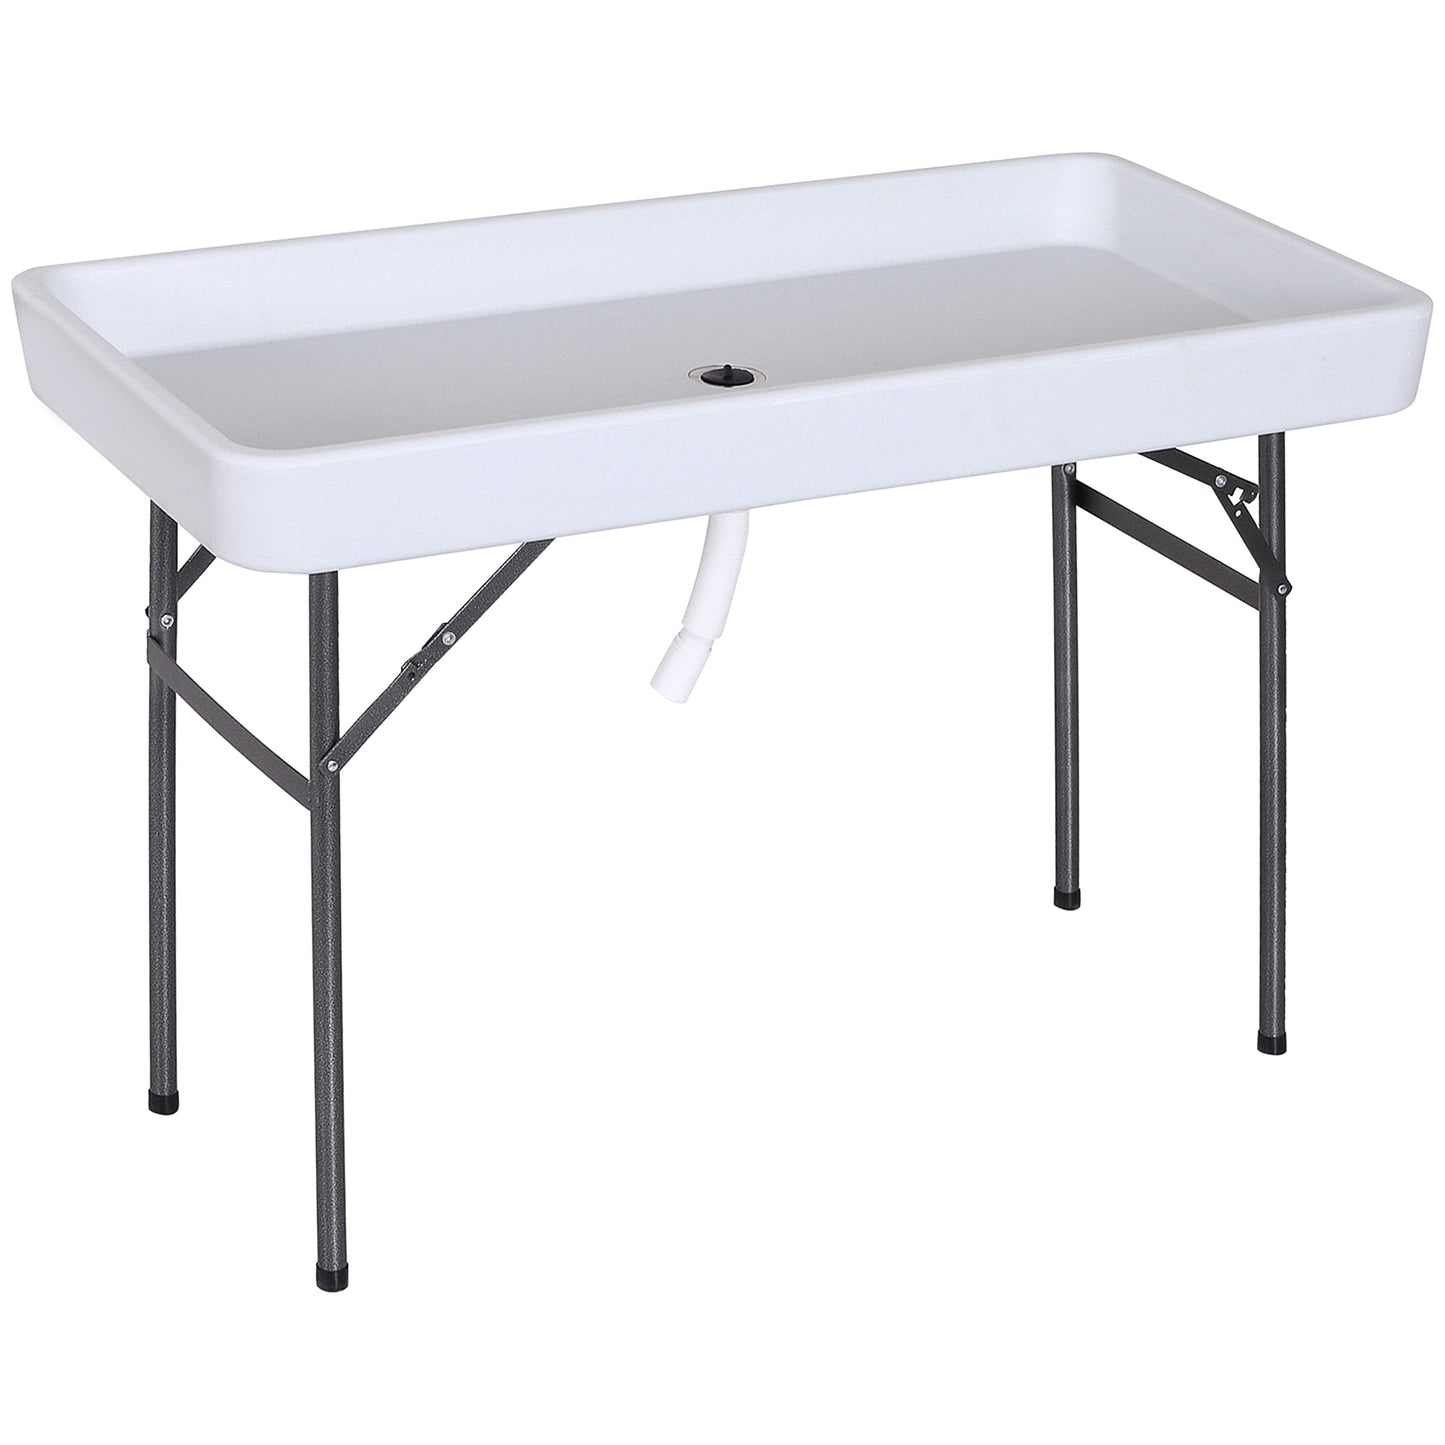 4ft Folding Picnic Table, Fish Fillet Cleaning Table, Camping Party Desk with Sink, White at Gallery Canada